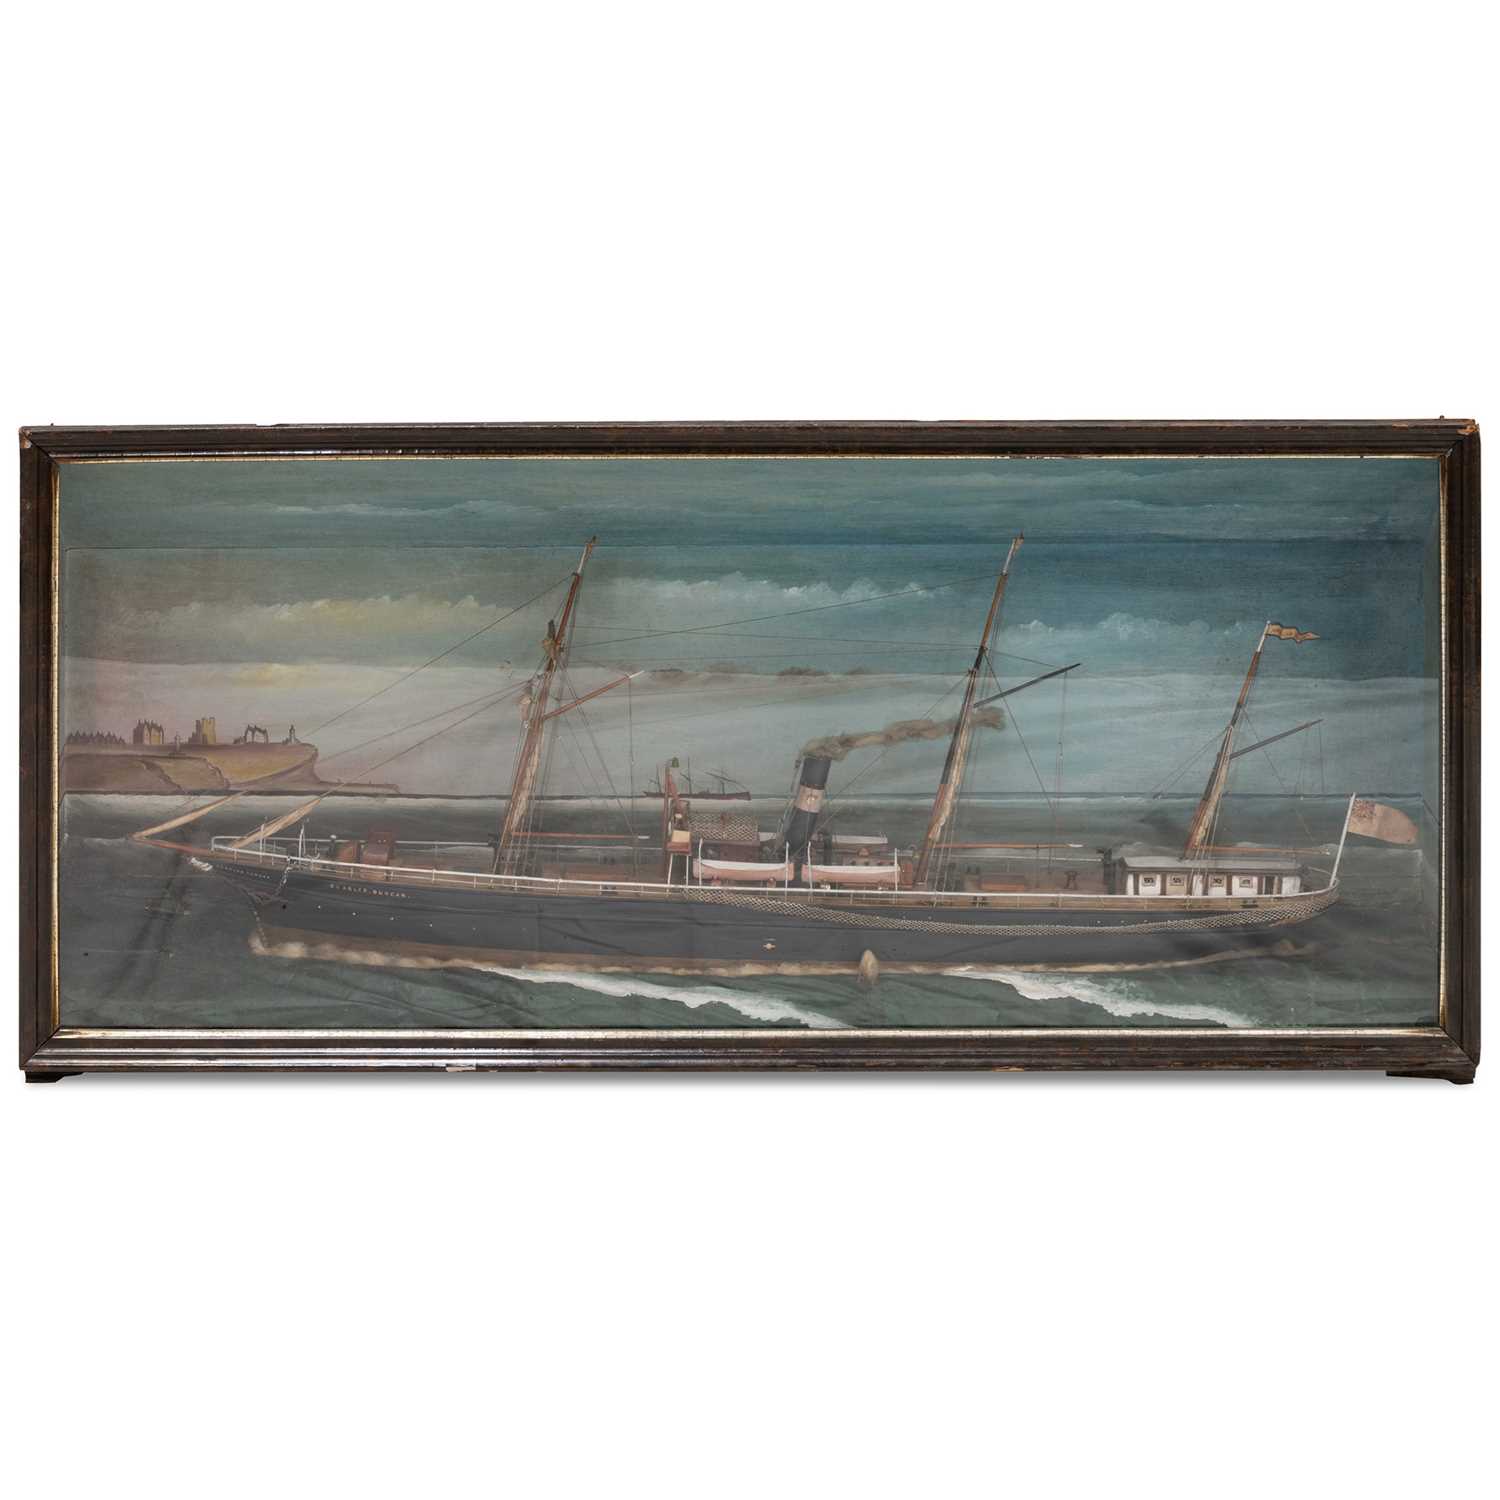 A LATE 19TH CENTURY MODEL OF A SHIP, "CHARLES DUNCAN"